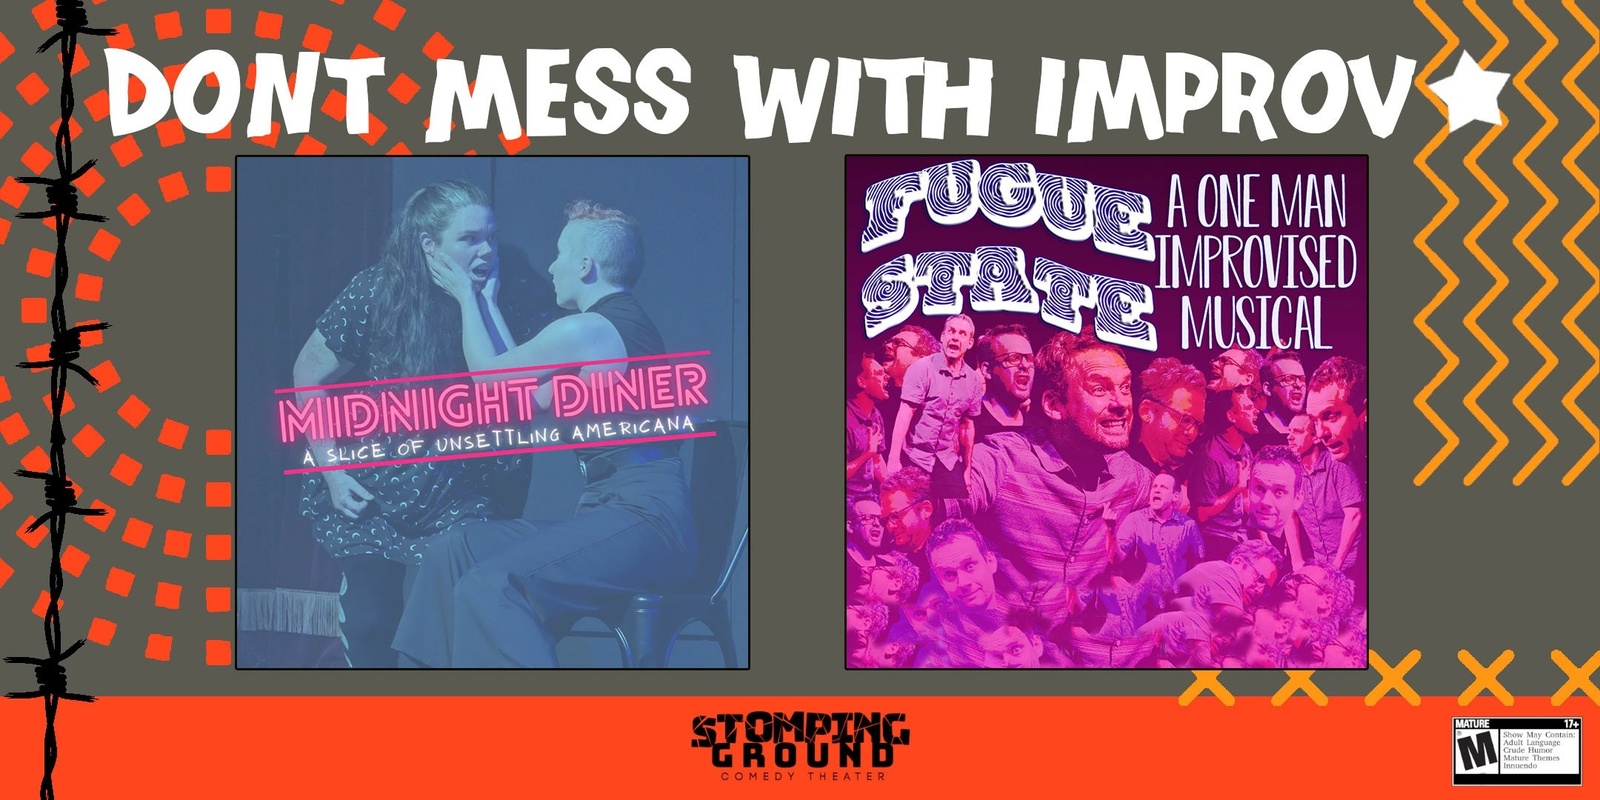 Banner image for Don't Mess with Improv